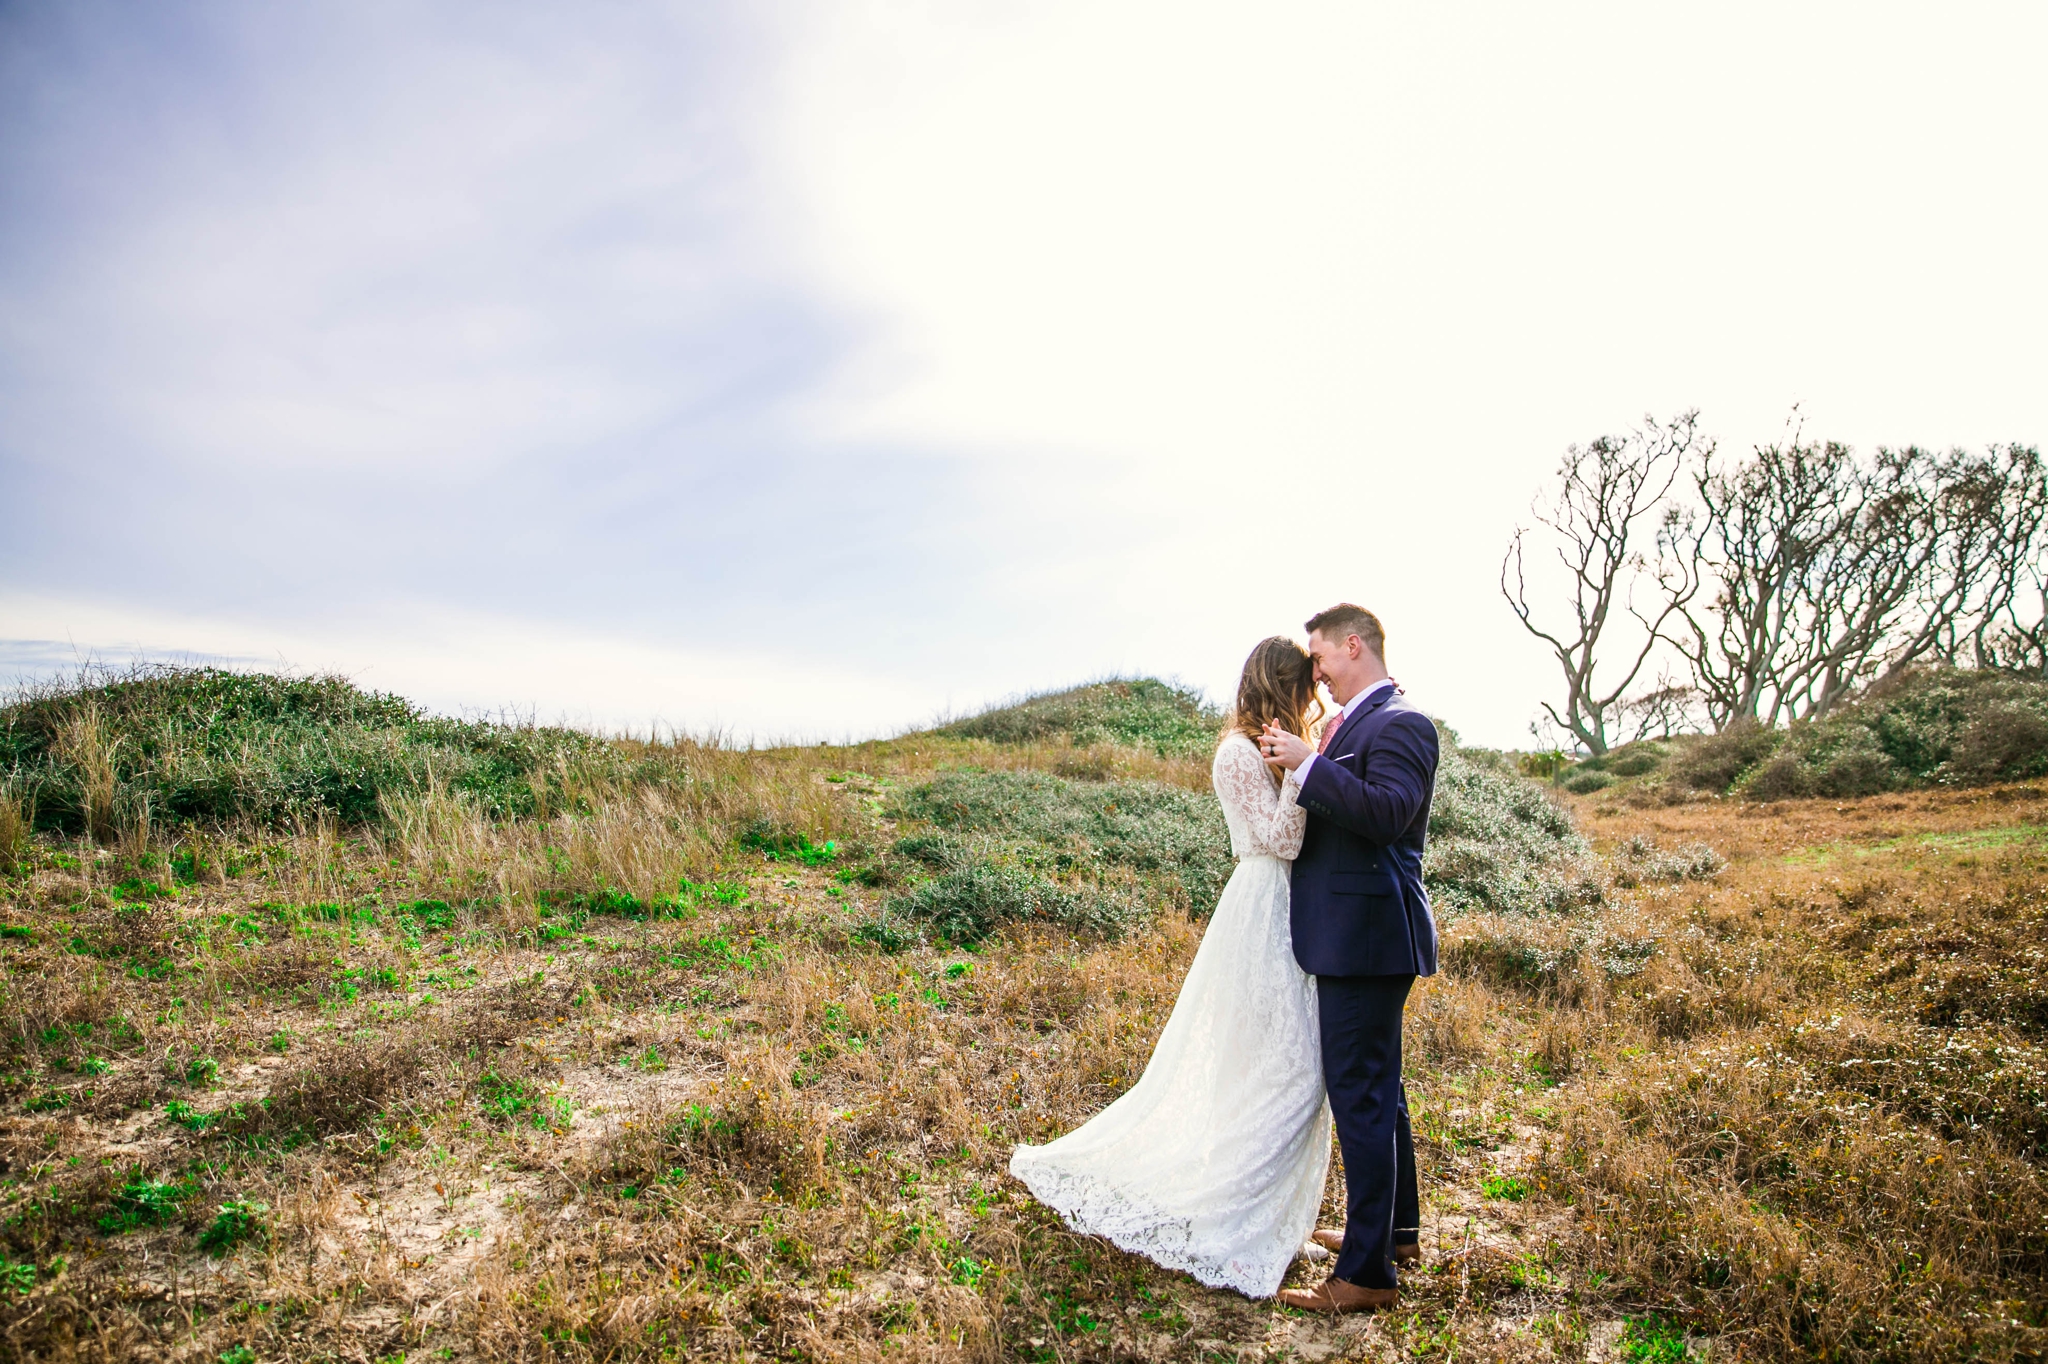 Bride and Groom in Lush Green Hills - Beach Elopement Photography - wedding dress by asos with purple and pink flowers and navy suit - oahu hawaii wedding photographer